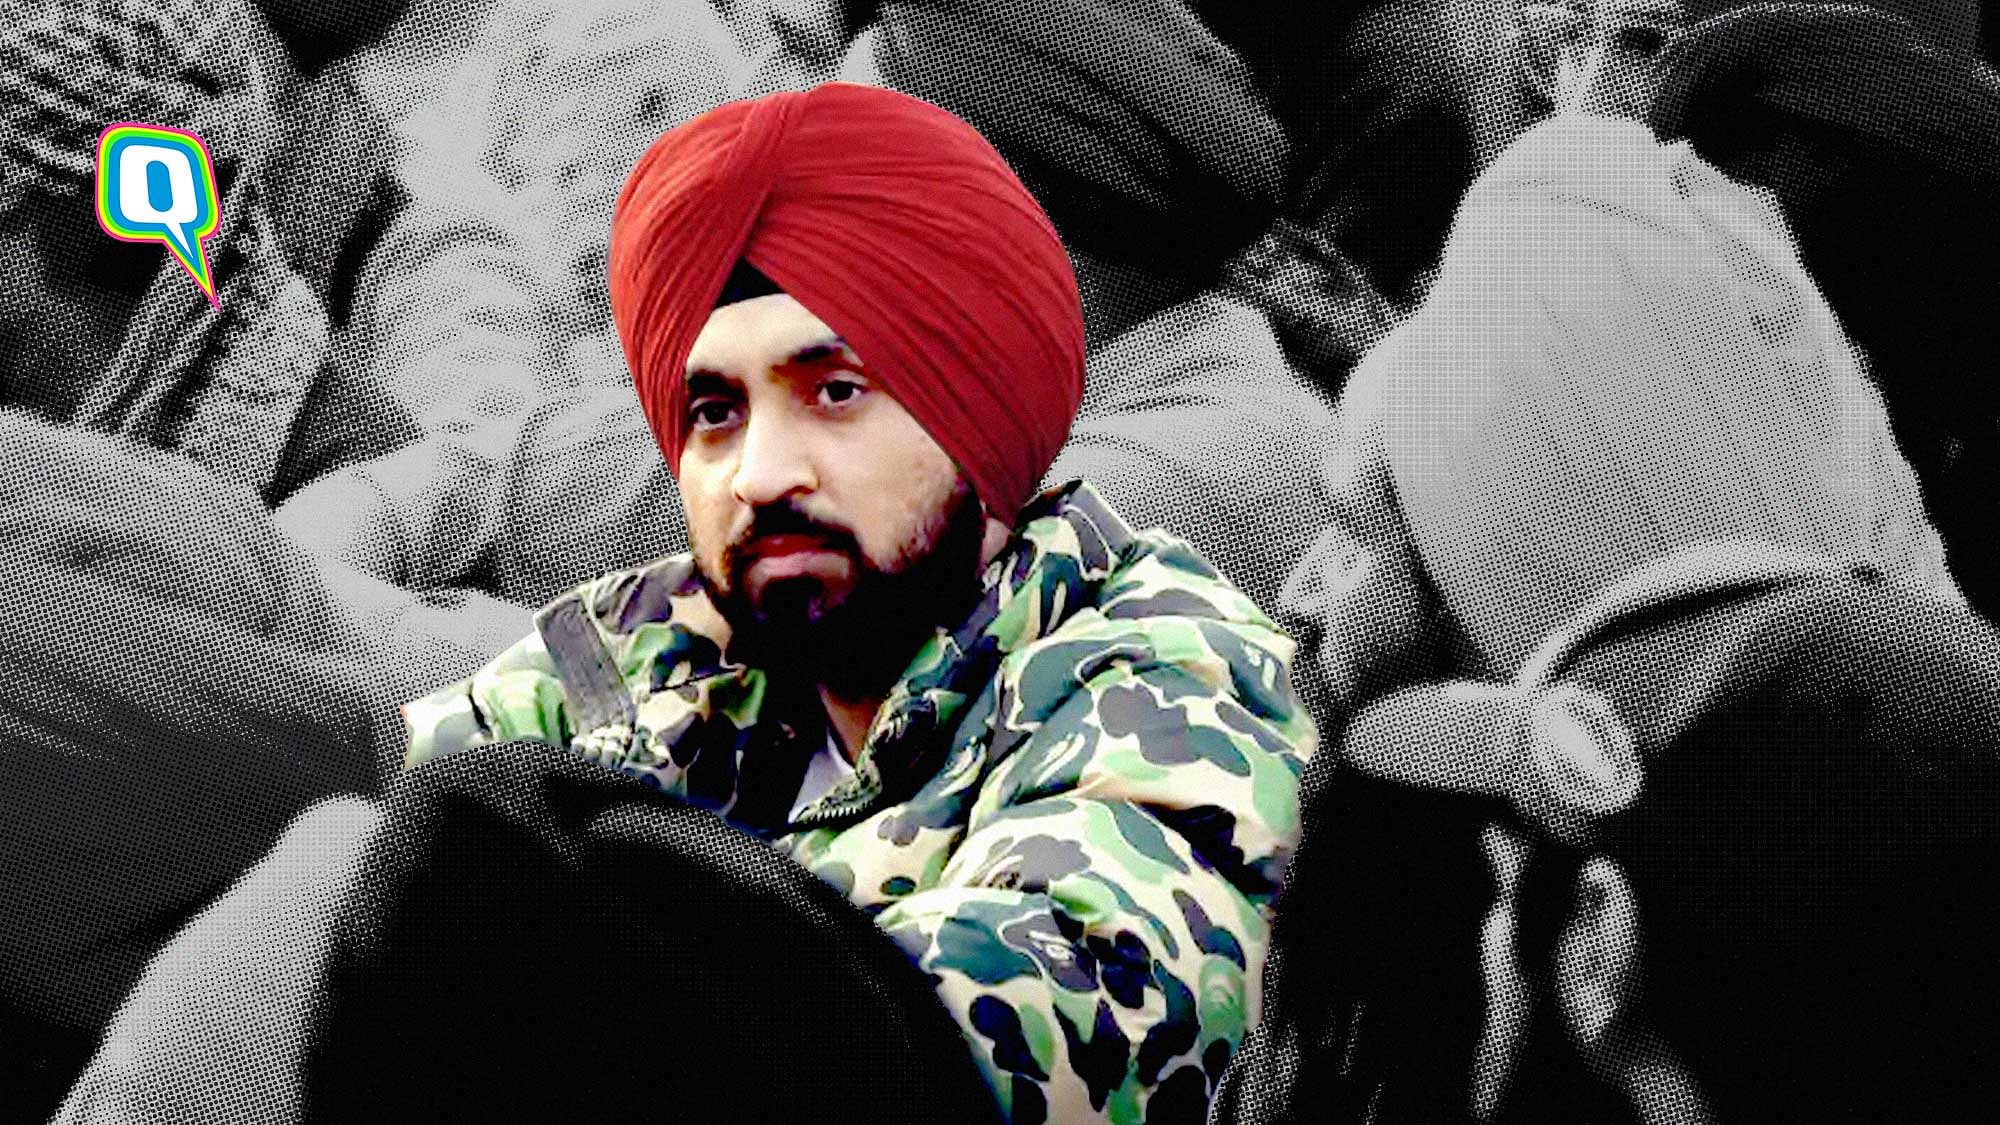 Diljit Dosanjh at Farmers Delhi Chalo Protests: 6 Things Celebs Should Learn From Diljit Dosanjh